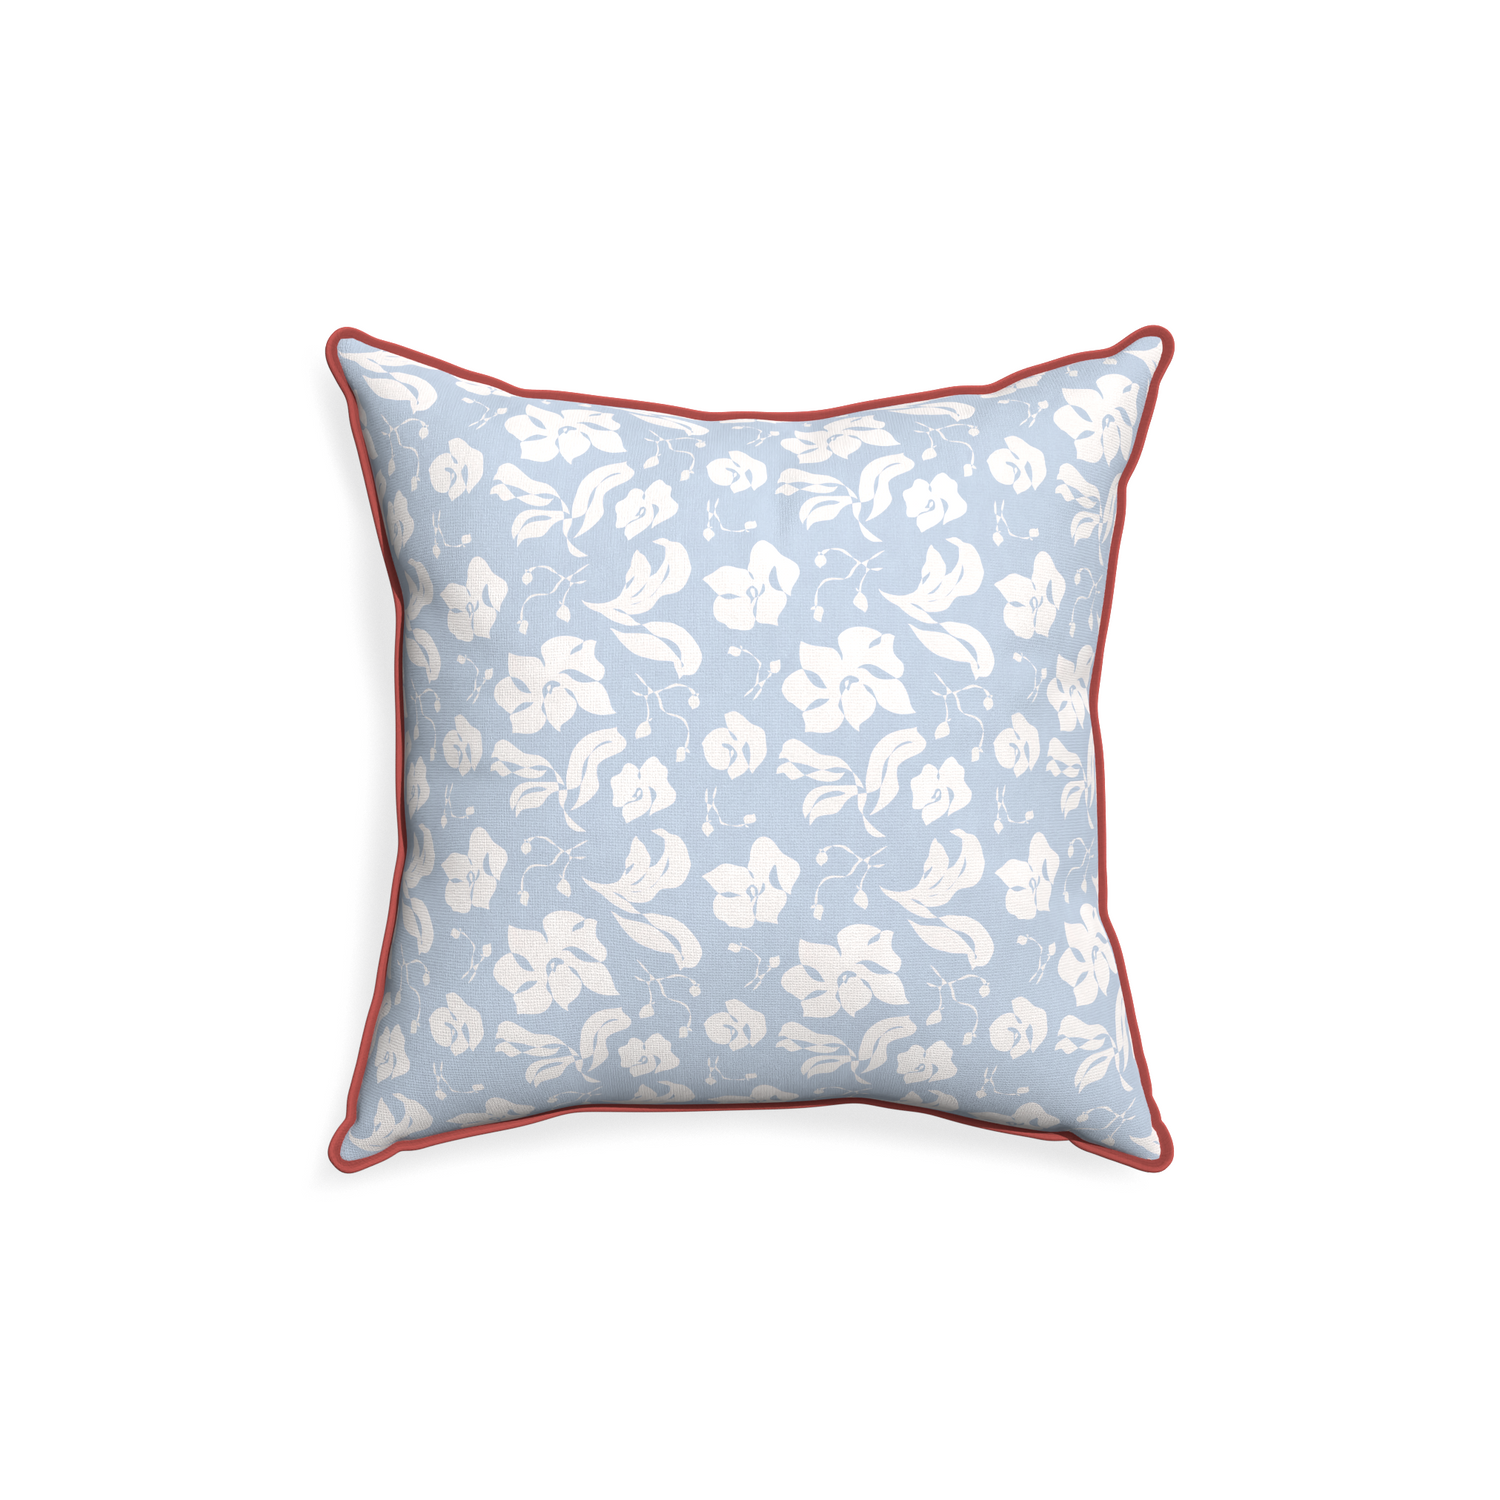 18-square georgia custom pillow with c piping on white background